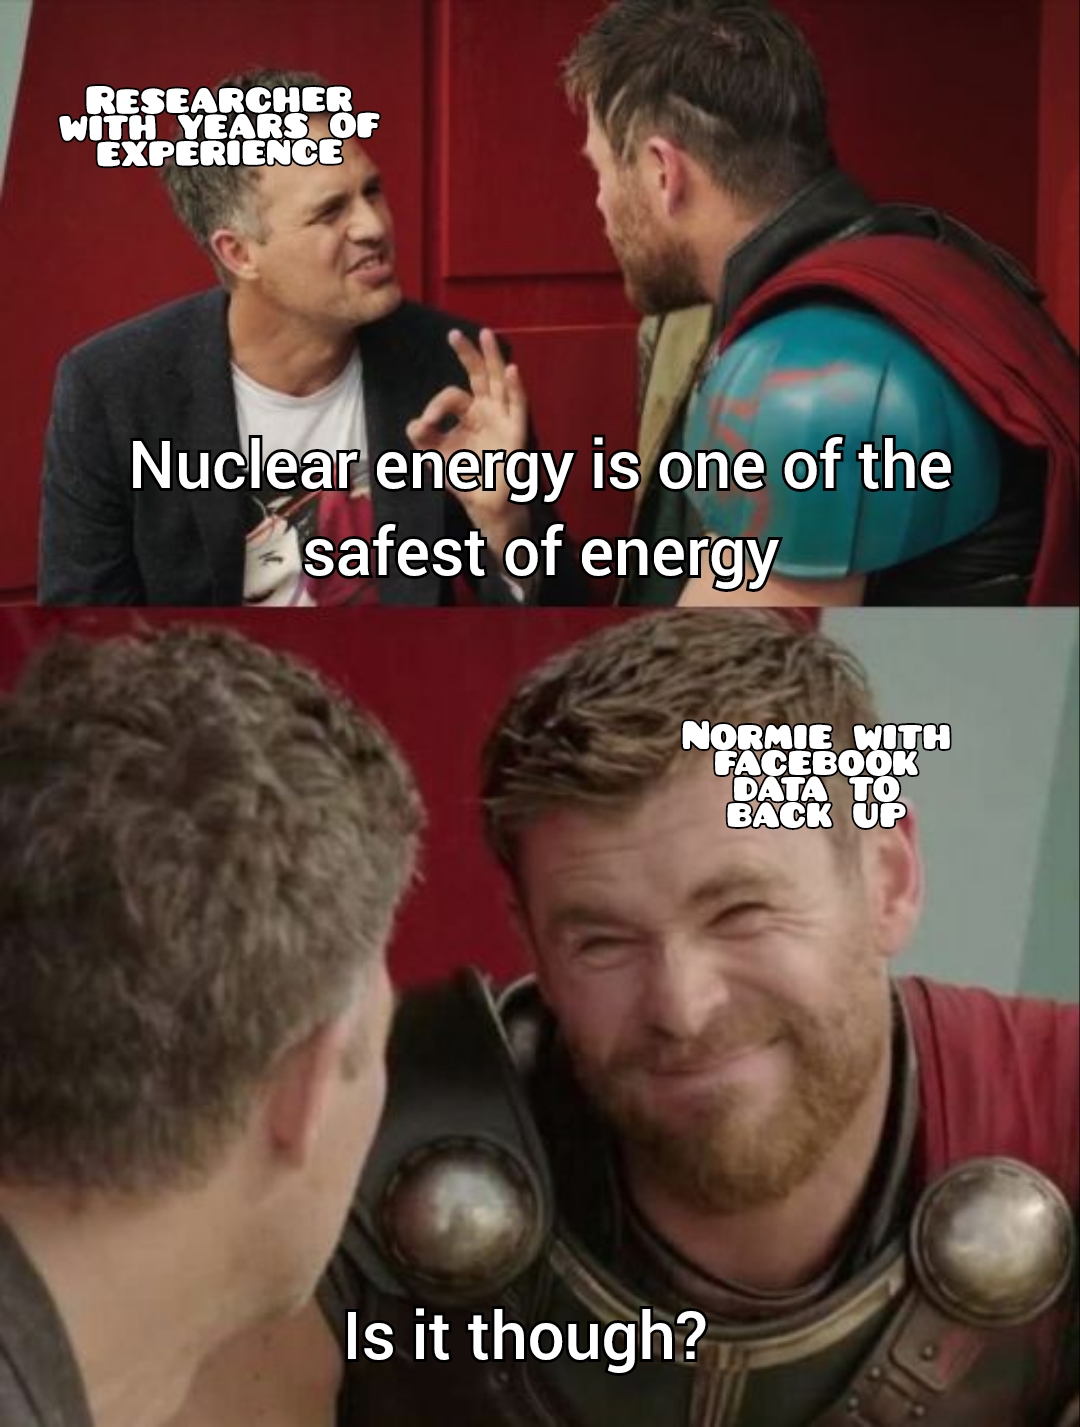 funny memes and pics - psit - Researcher With Years Of Experience Nuclear energy is one of the safest of energy Normie With Facebook Data To Back Up Is it though?